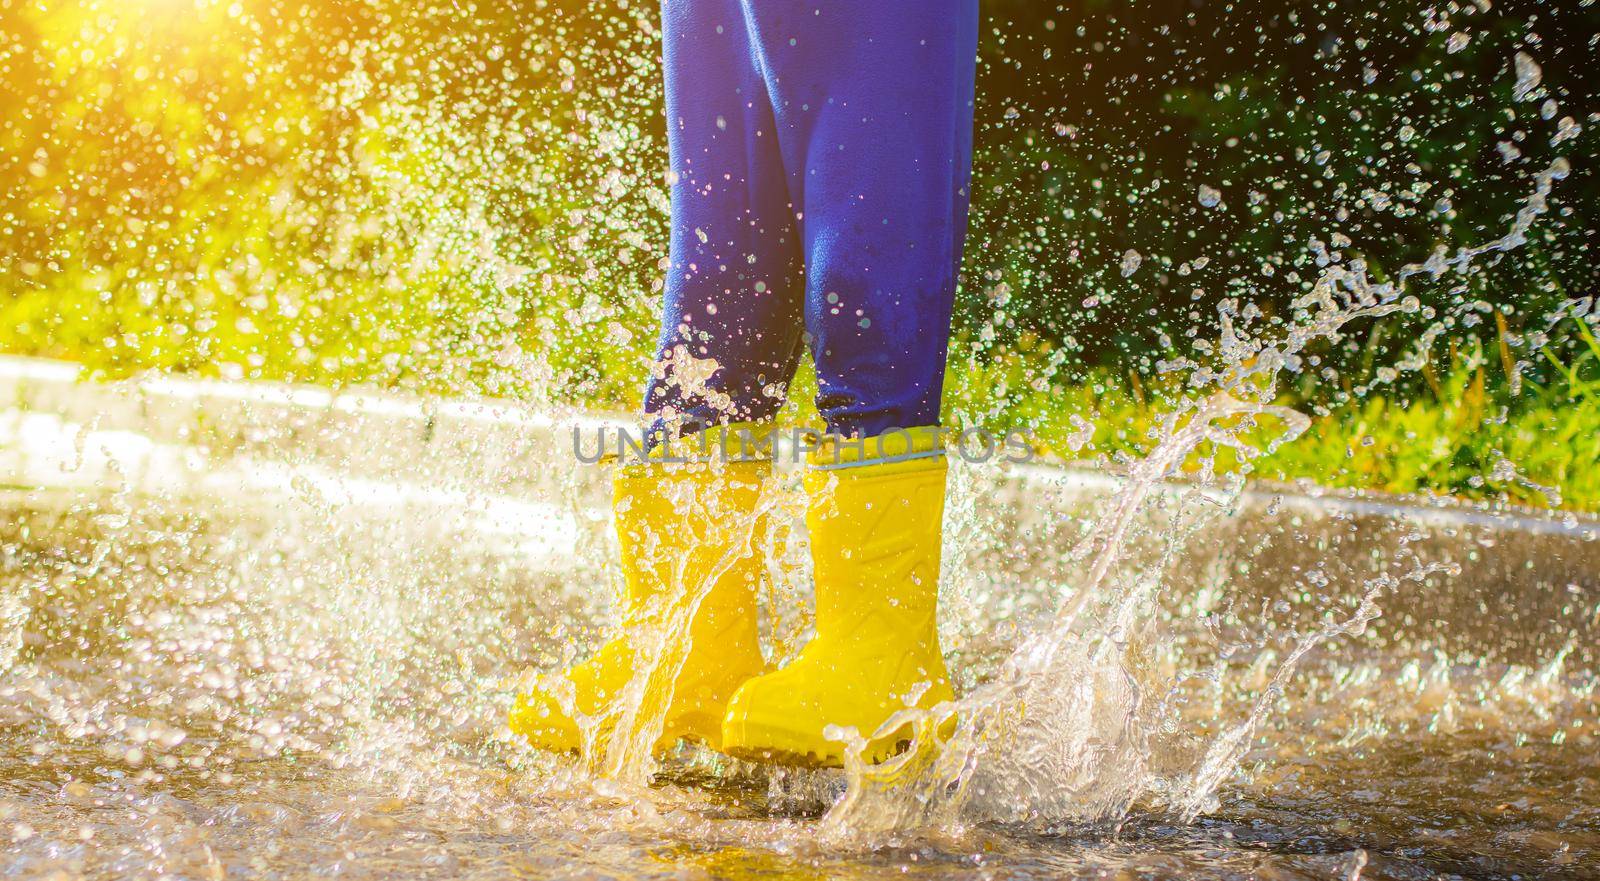 My rubber-booted feet are Bouncing in a puddle. Article about rubber boots. Children's summer shoes. Puddles after rain. Bad weather. A child jumps in a puddle. Happy childhood. A happy boy in rubber boots jumps in puddles. by alenka2194